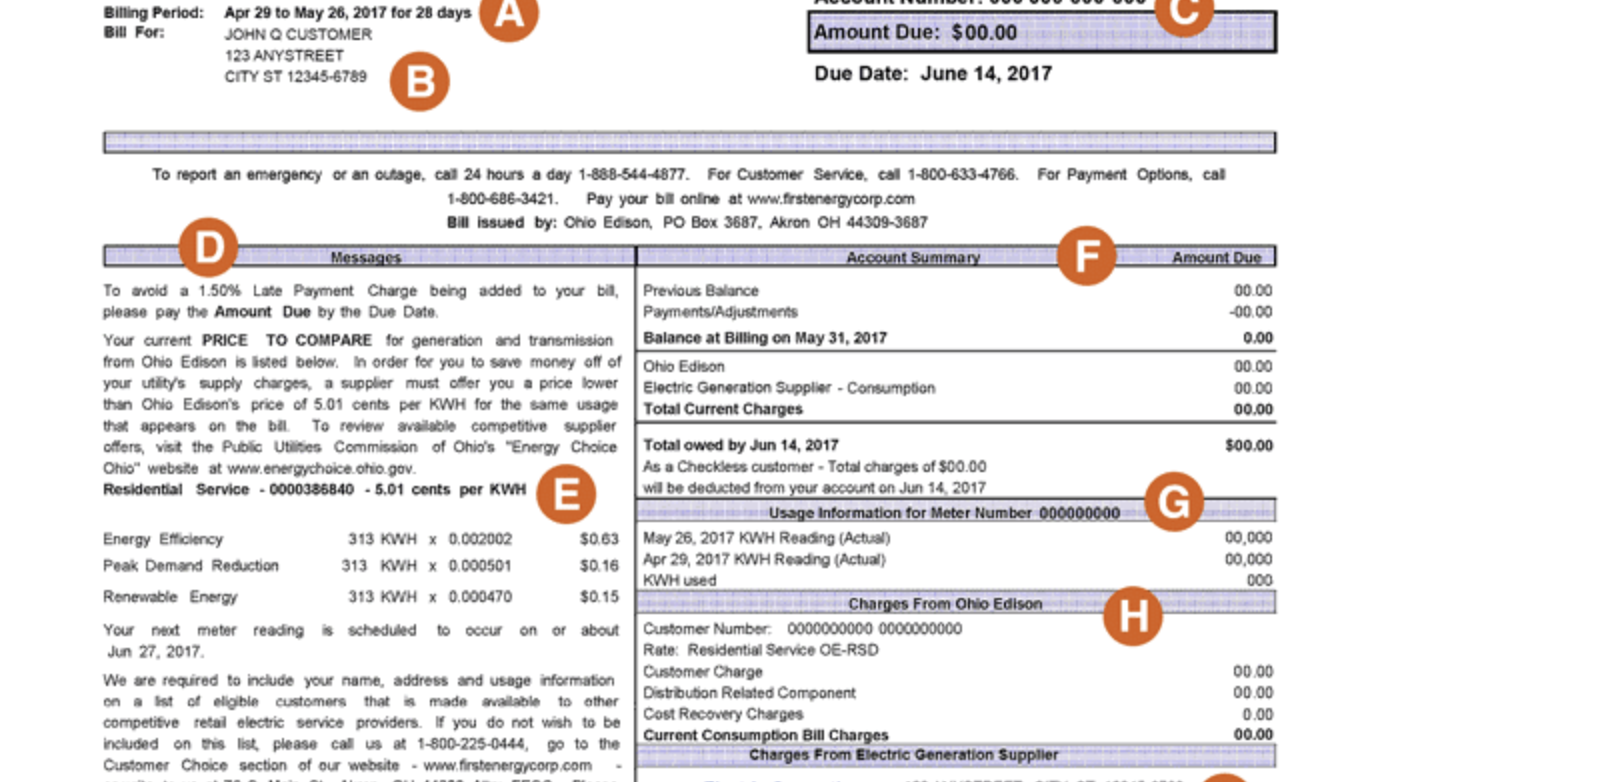 Reveals where a customer can find their customer number on the Ohio Edison electric bill